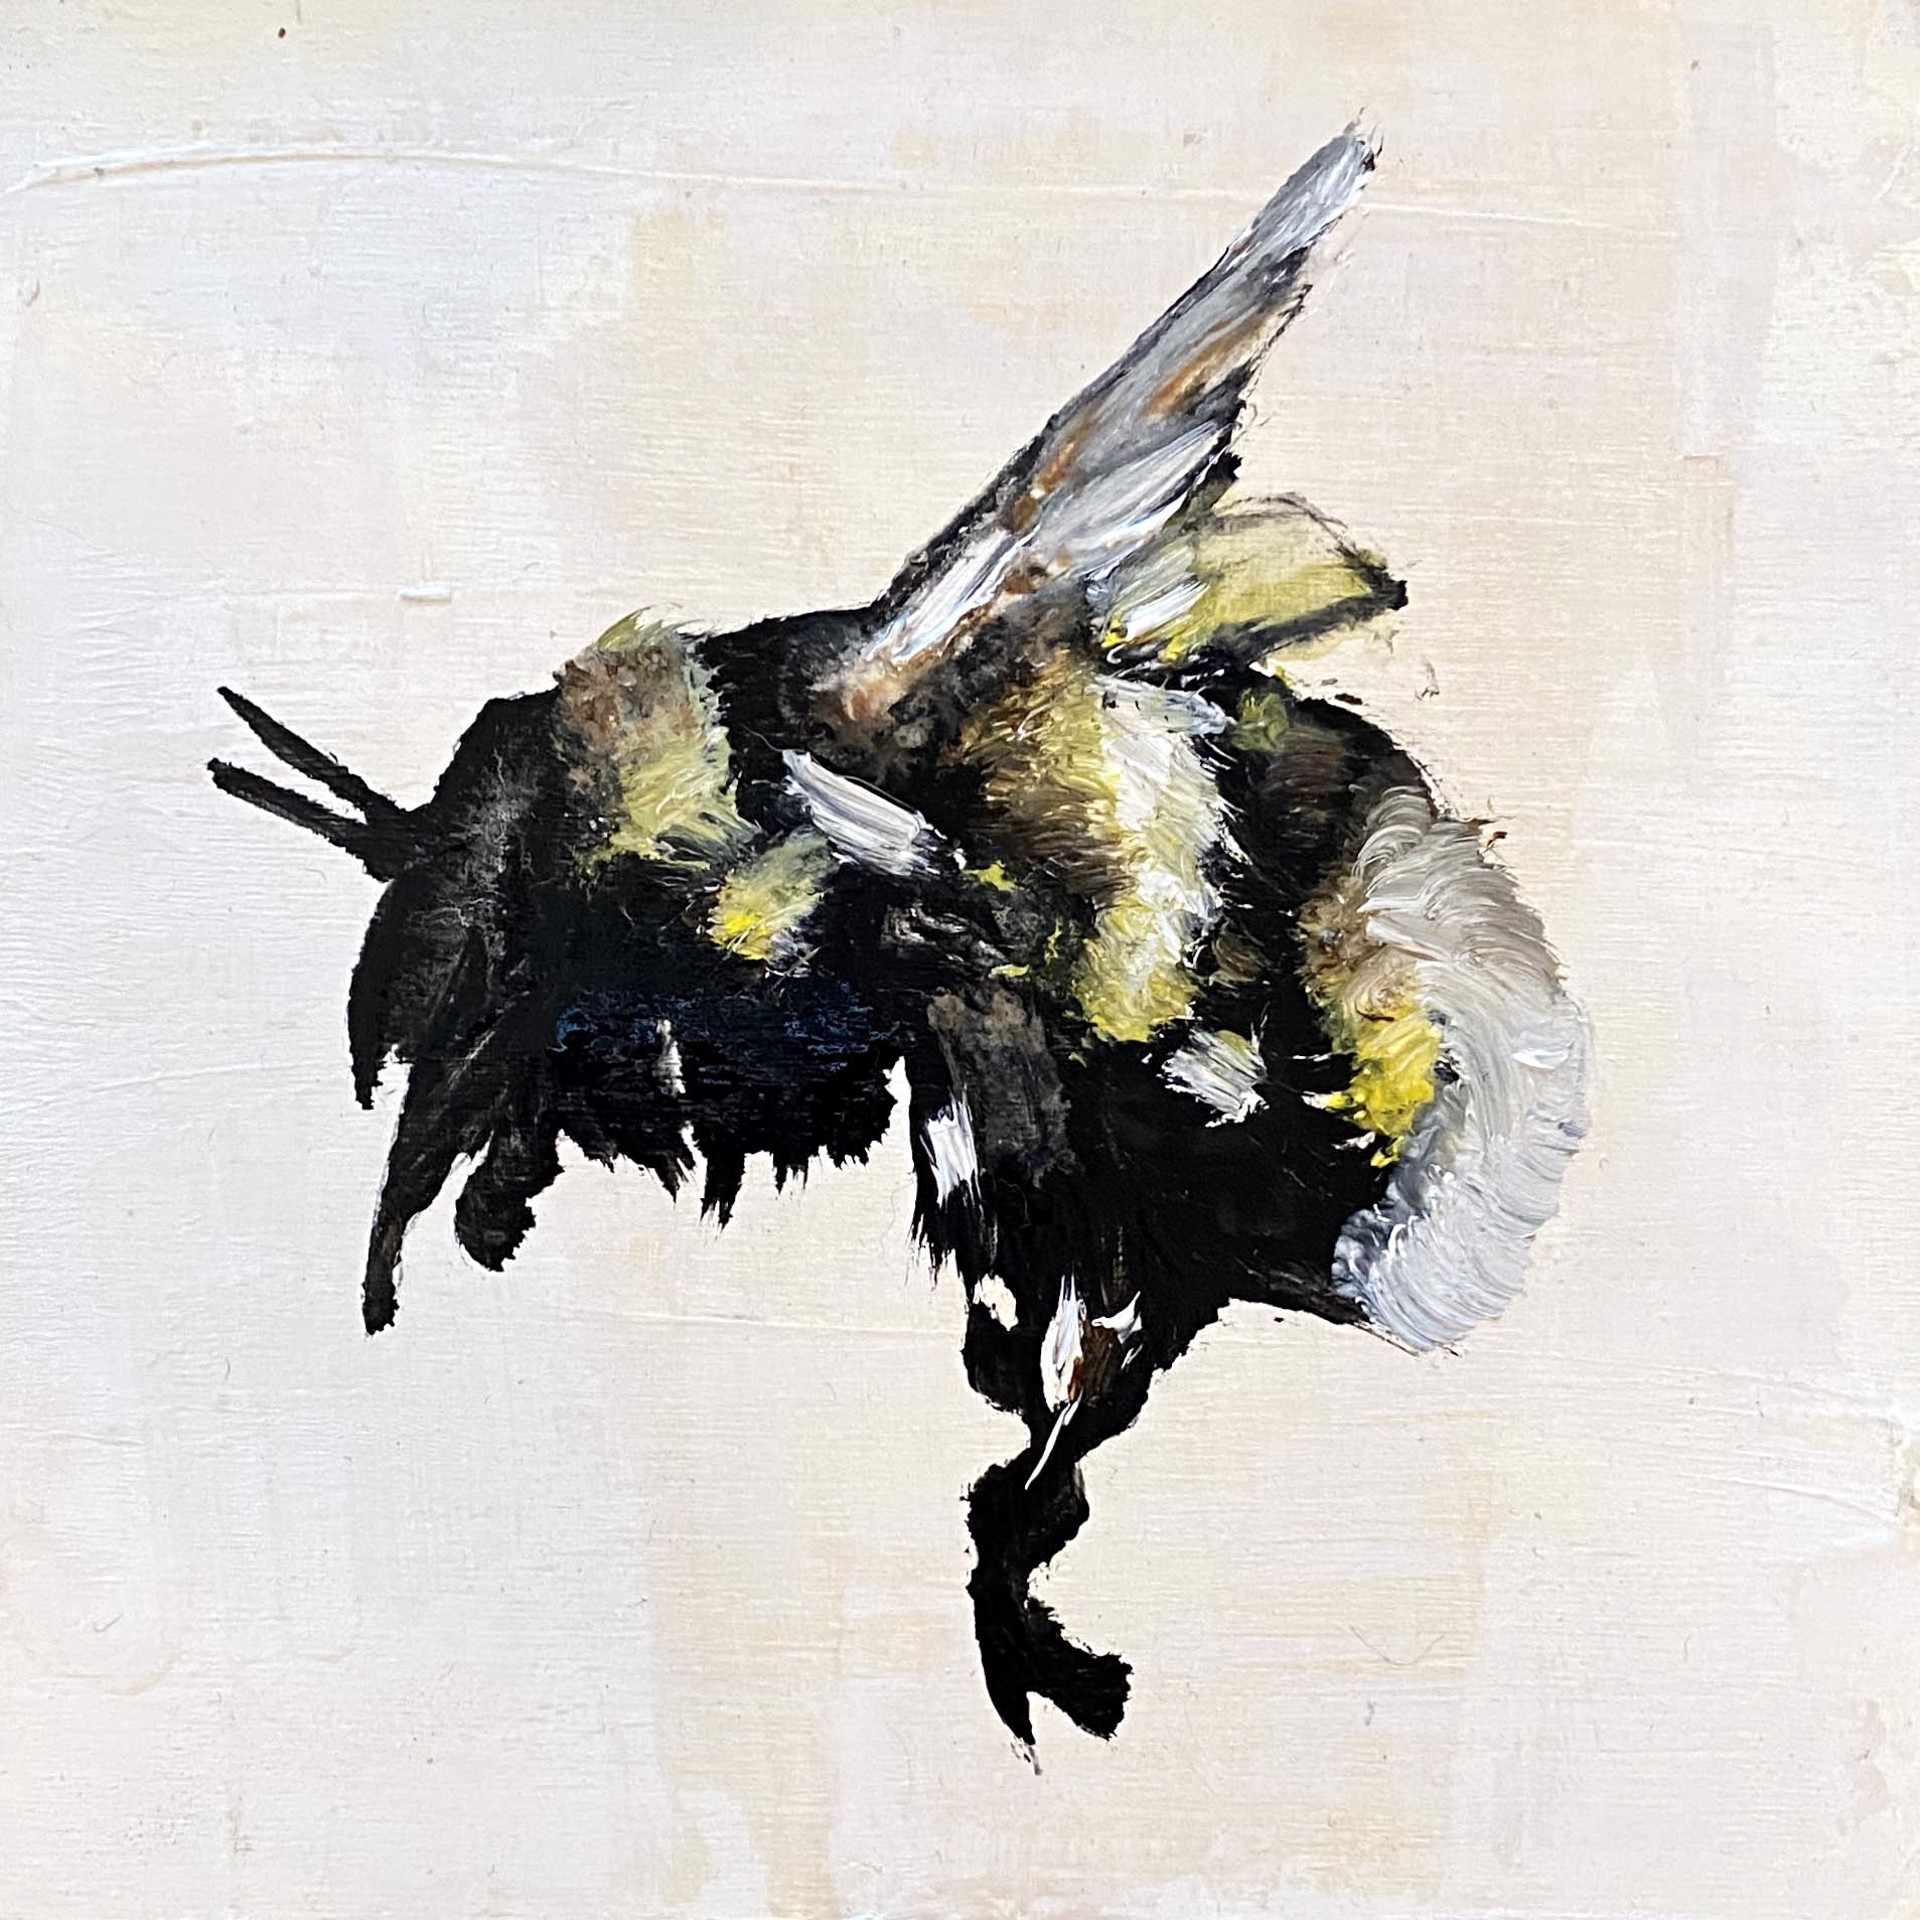 An Original Oil Painting Of A Bumble Bee, By Jenna Von Benedikt